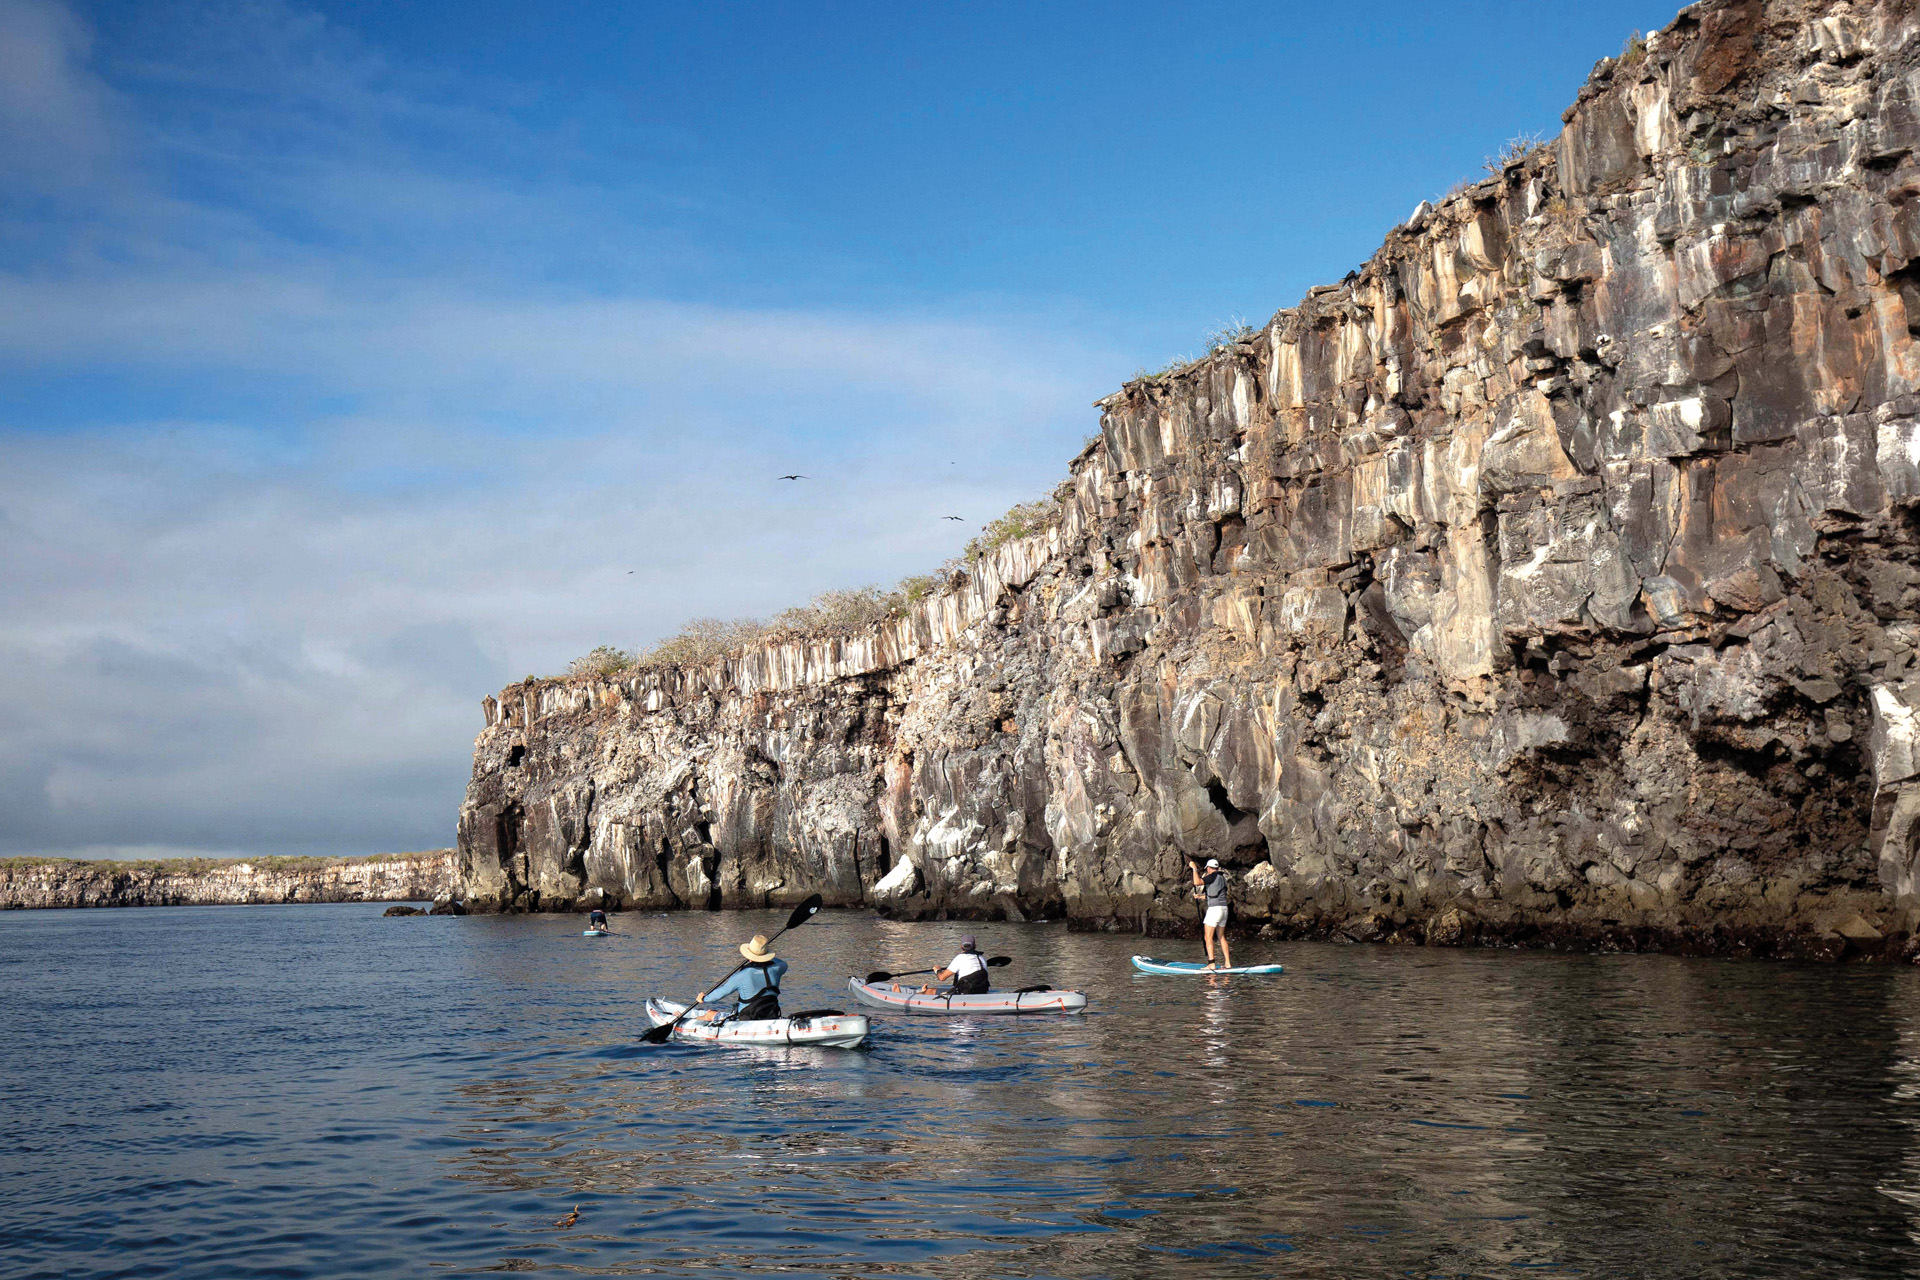 people kayaking in front of a cliff face